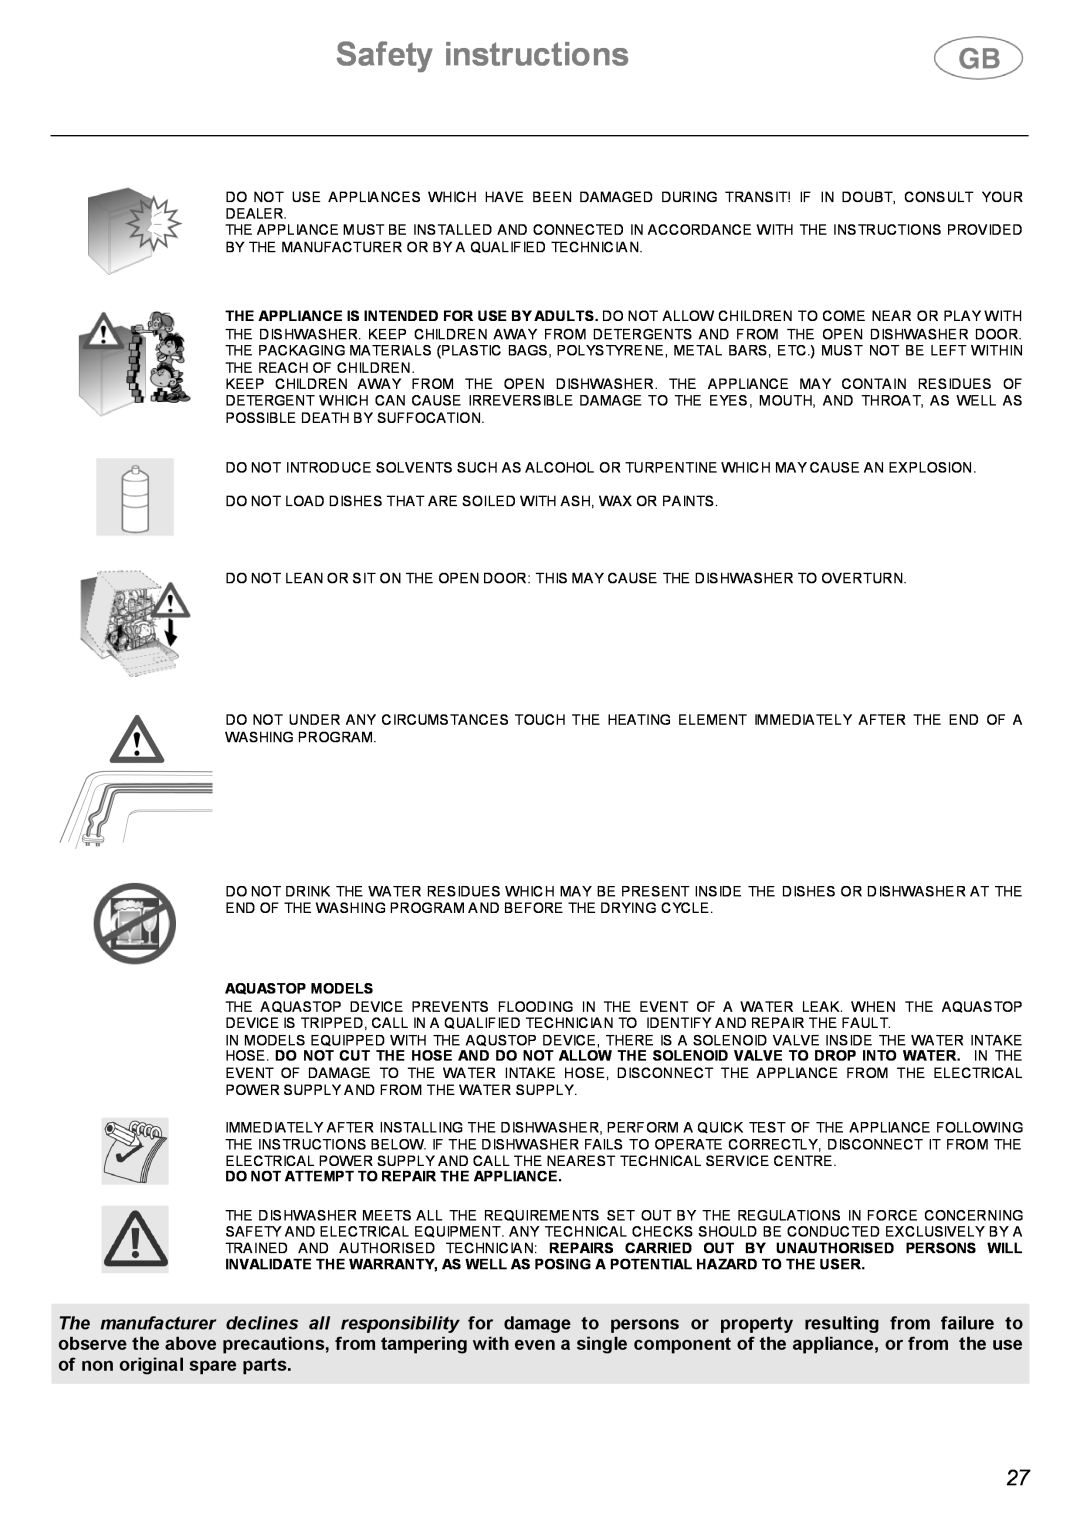 Smeg LVF32G instruction manual Safety instructions, Aquastop Models, Do Not Attempt To Repair The Appliance 